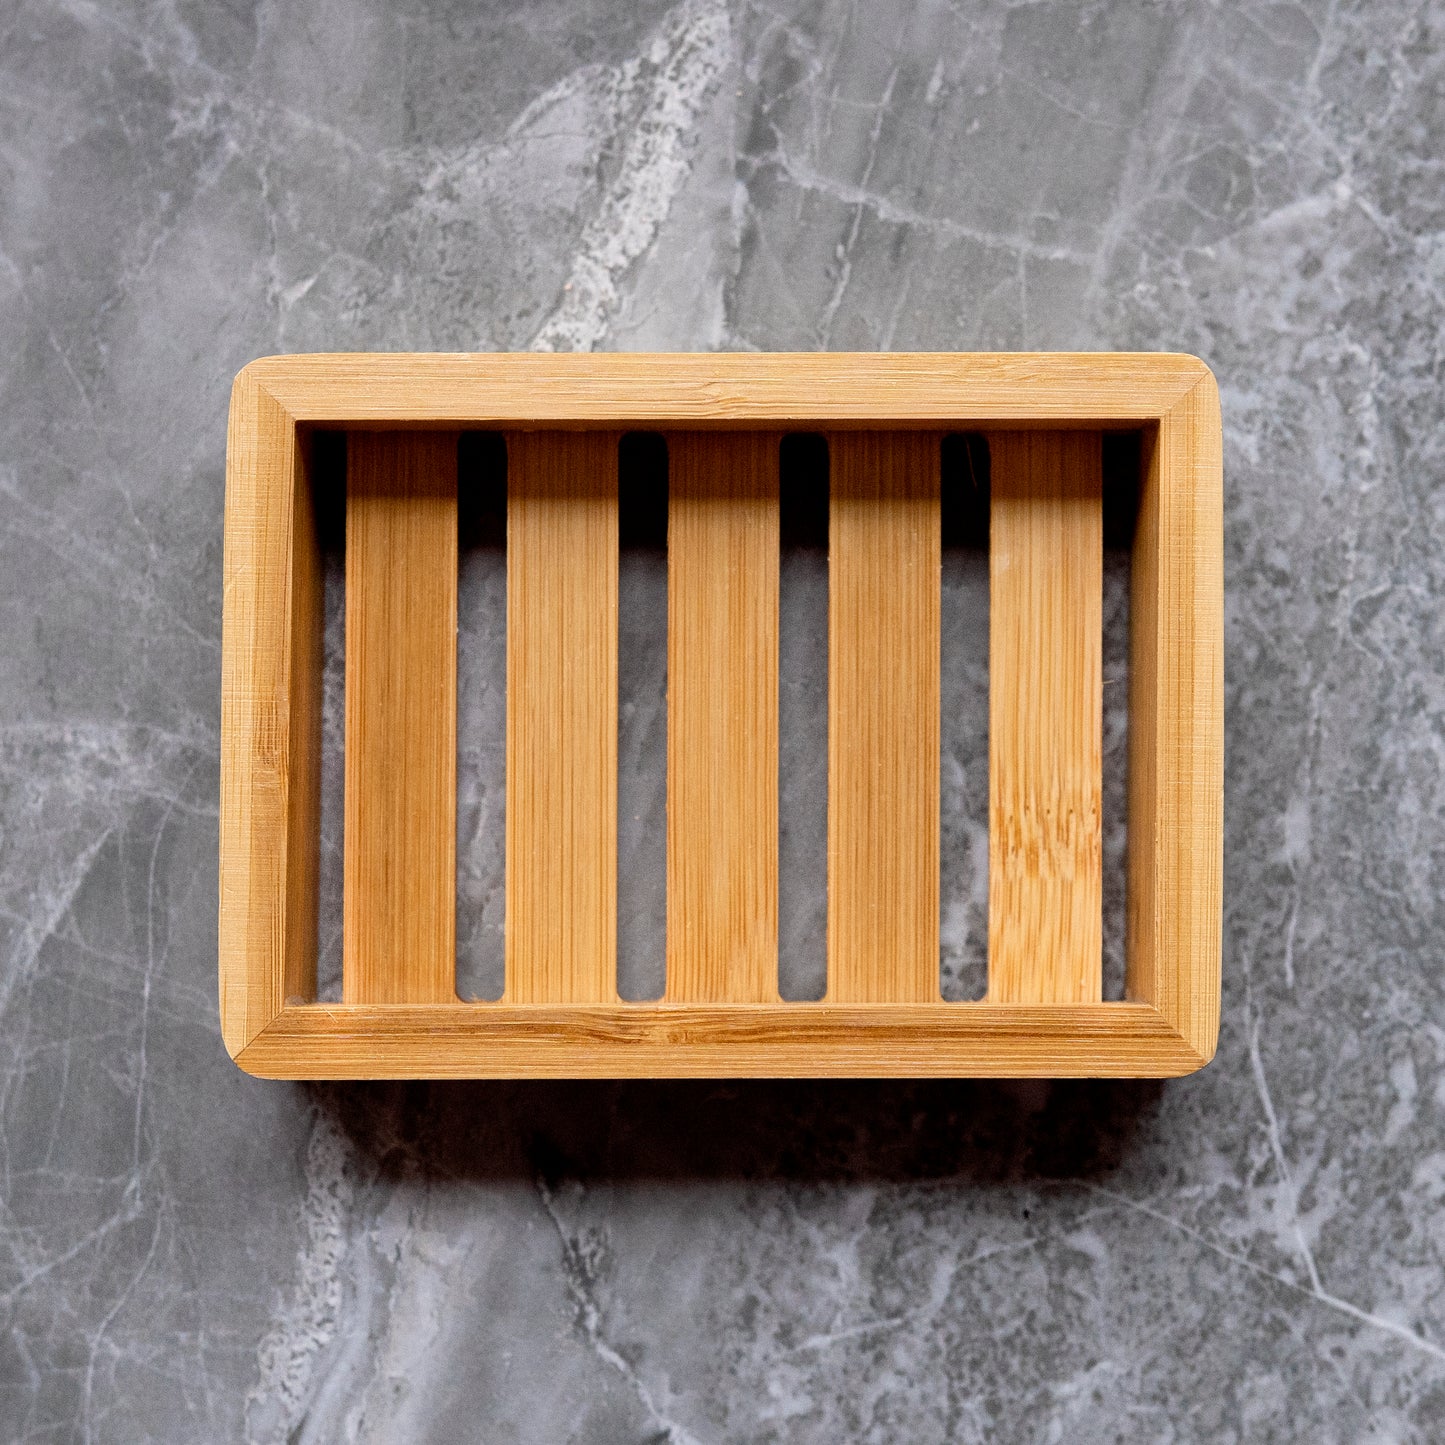 image of bamboo soap dish on dark marble background